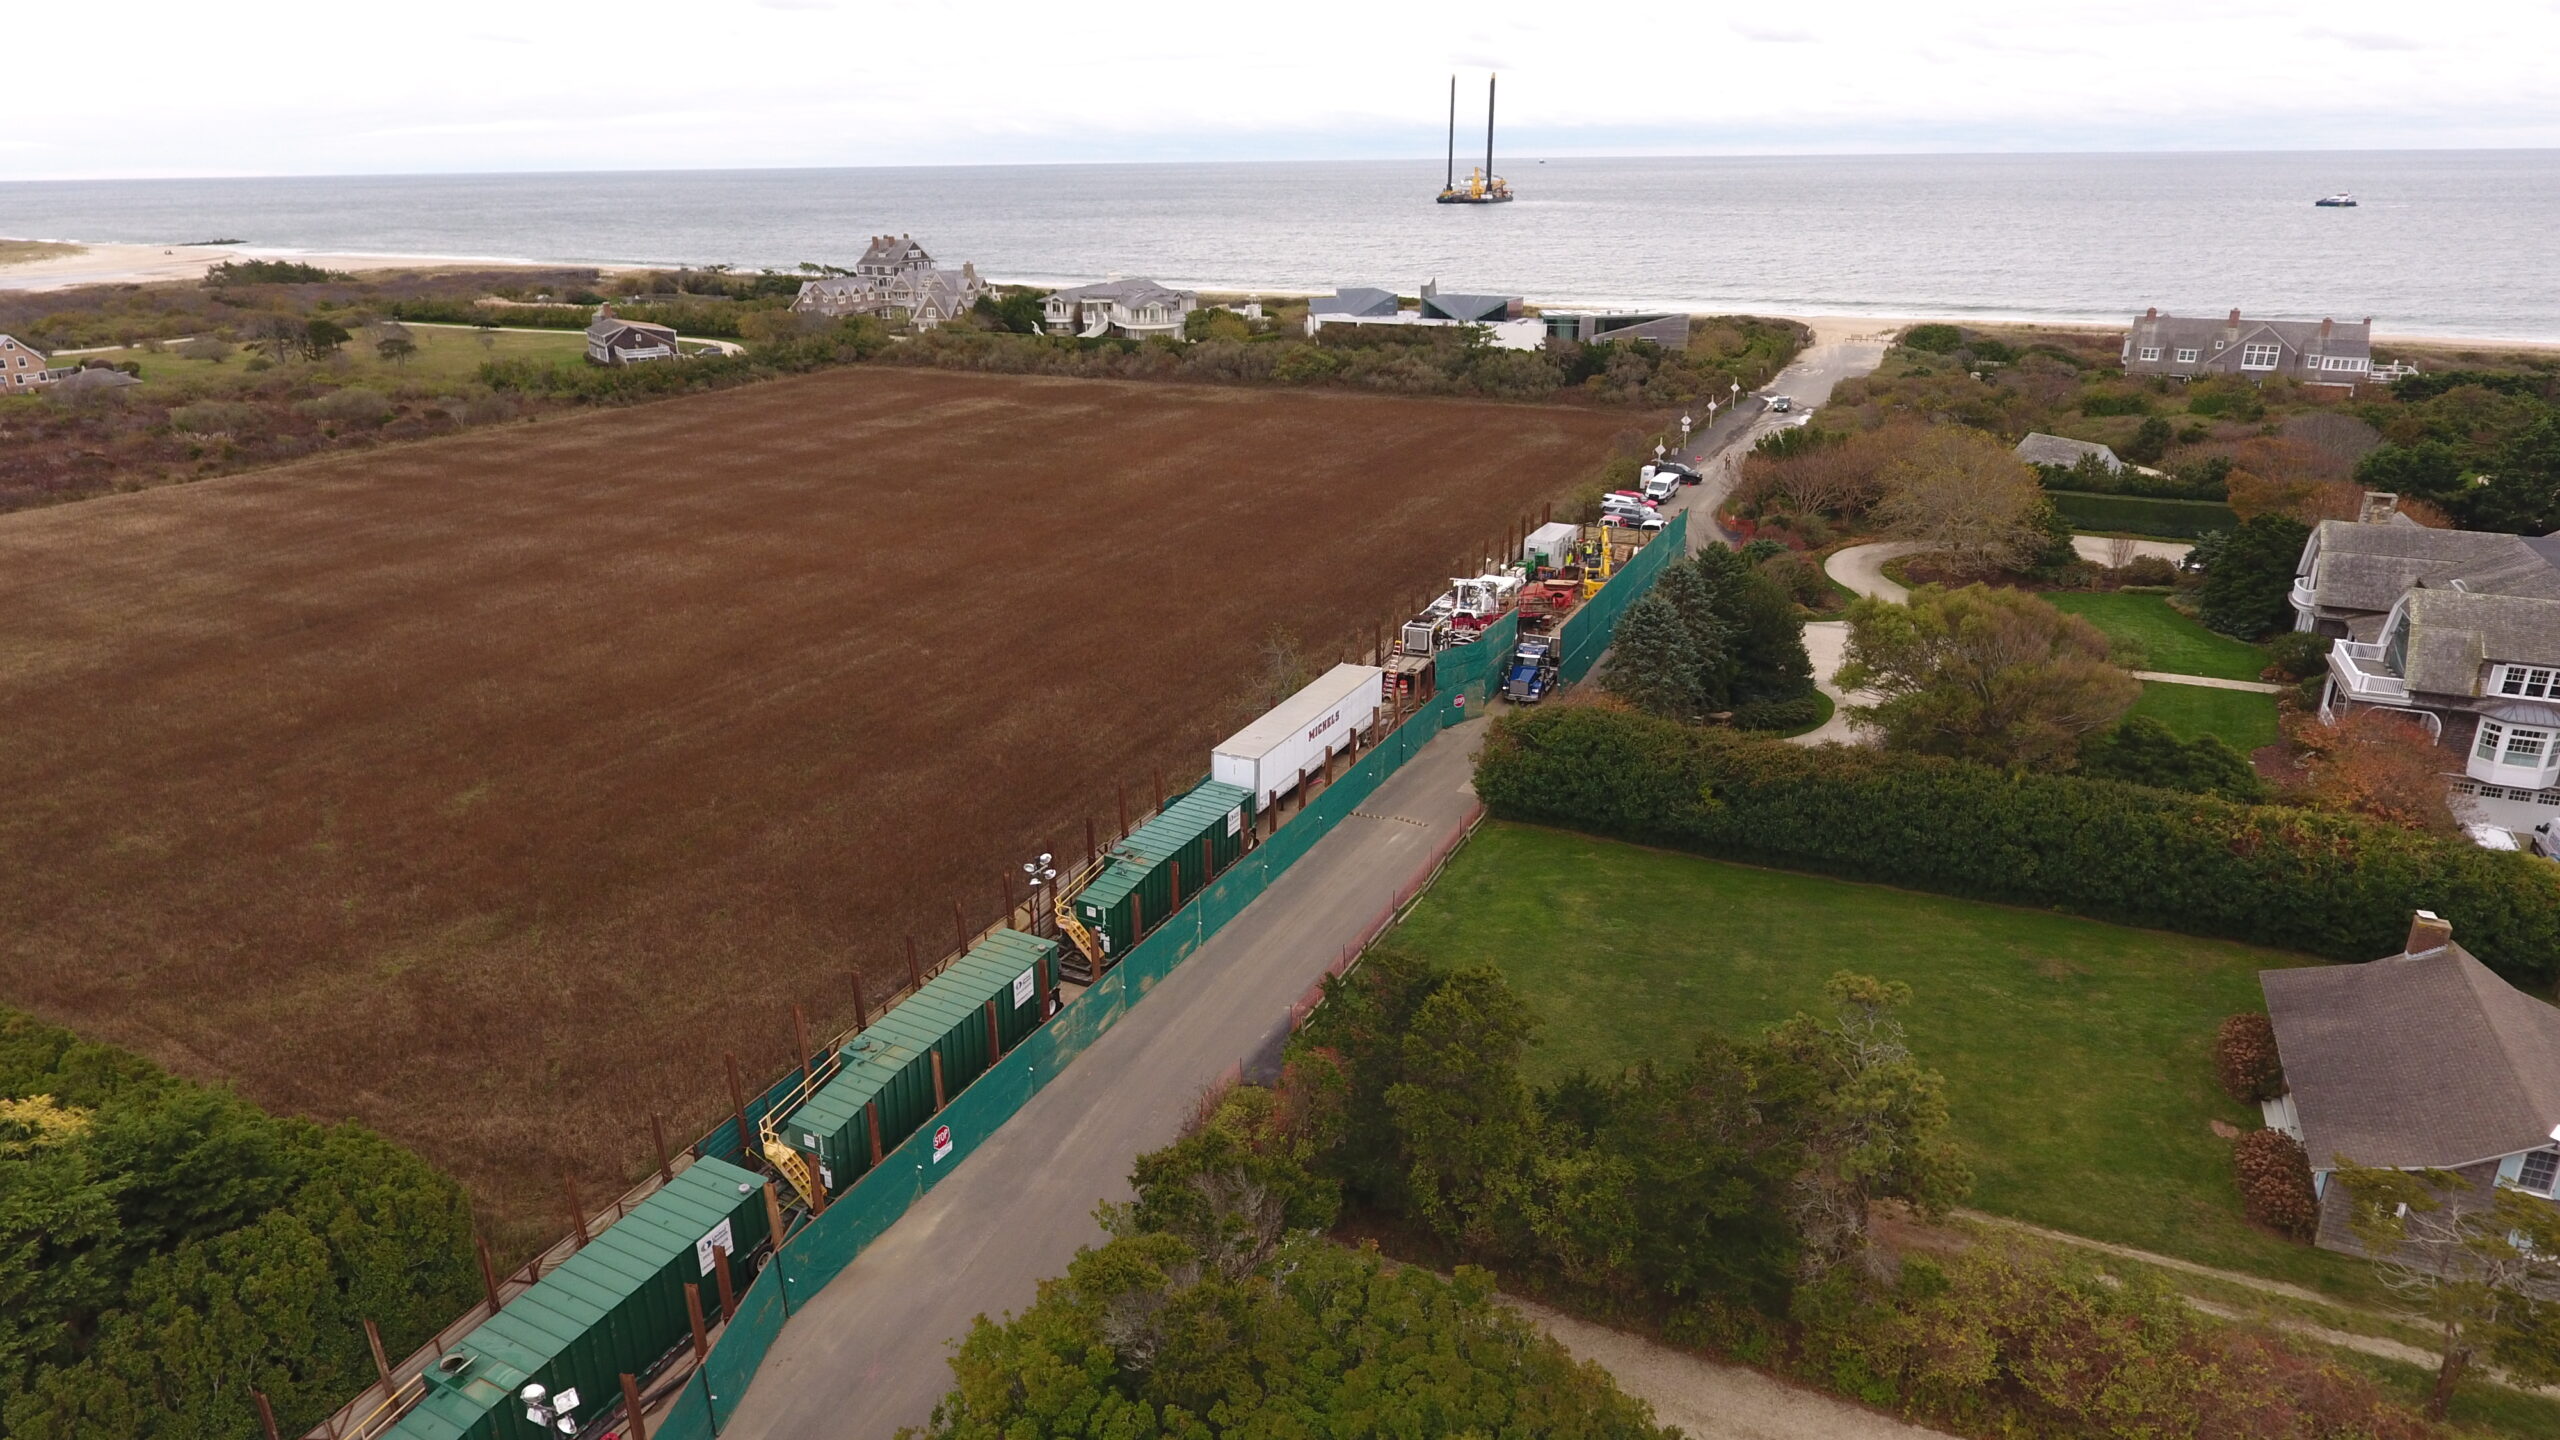 The horizontal drilling was conducted at the end of Beach Lane. The work got underway in November and had been scheduled to last as long as April, but is already complete. The 